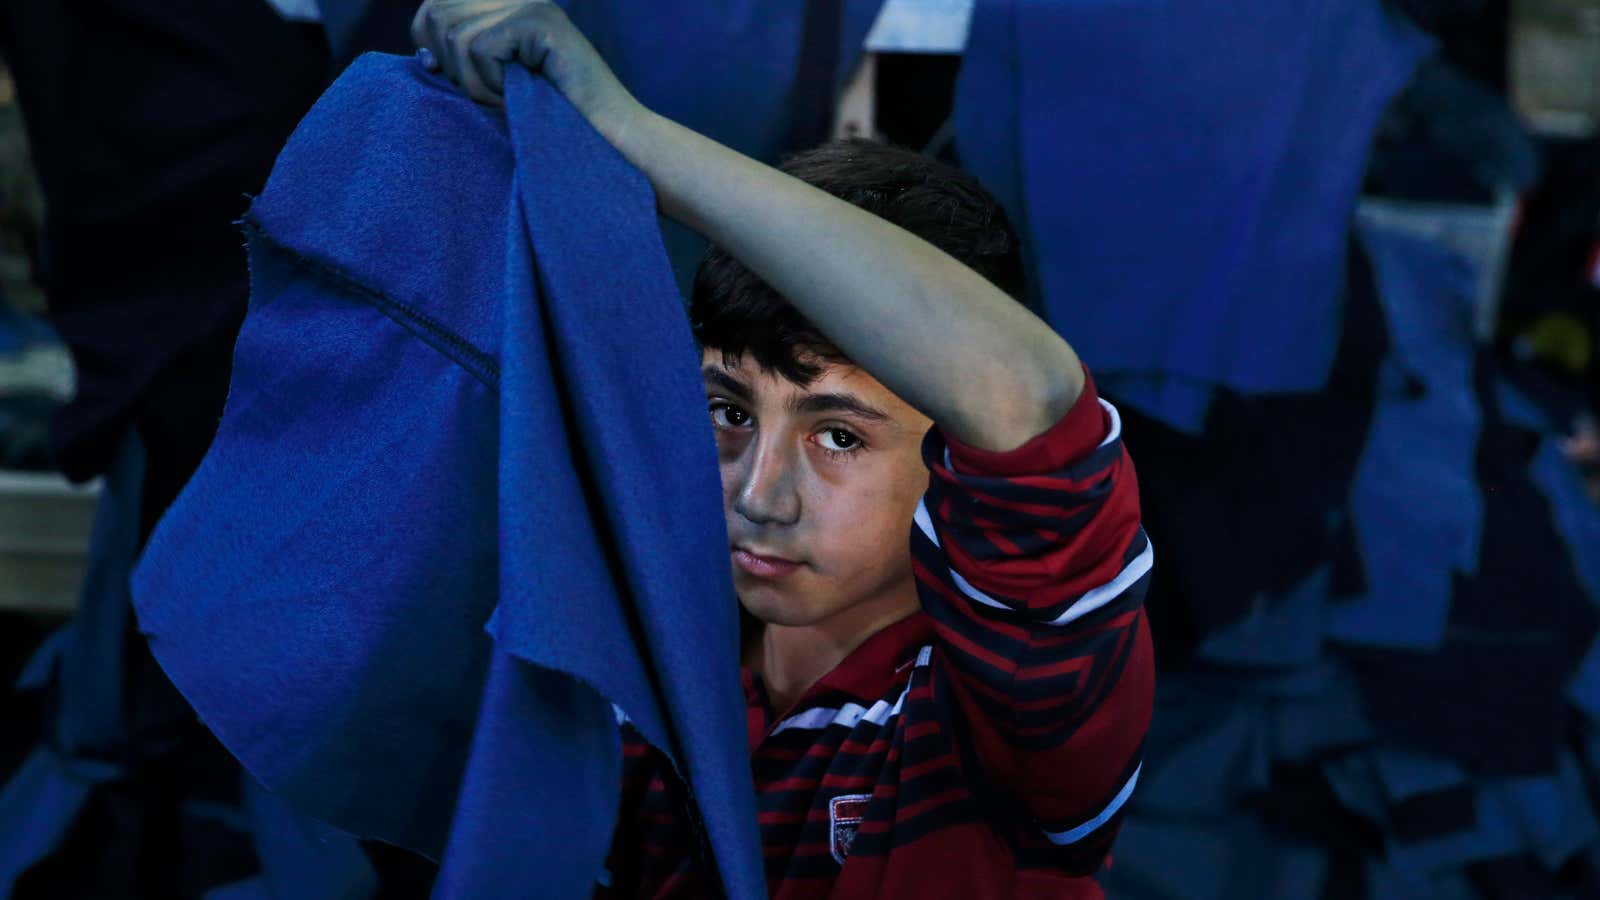 A Syrian refugee child works at a clothing workshop in Turkey.